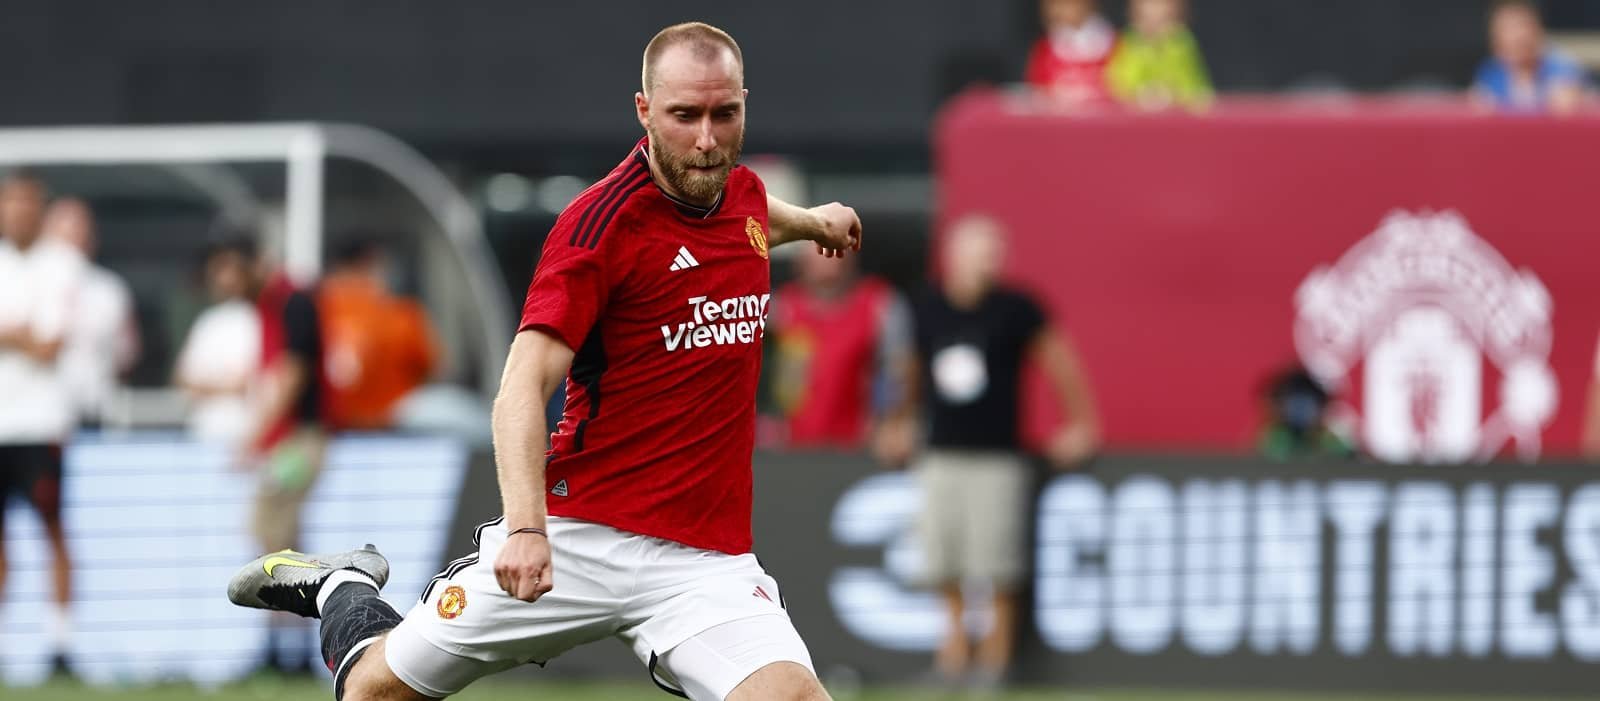 “He plays with slightly different types”: Christian Eriksen addresses his lack of minutes this season – Man United News And Transfer News